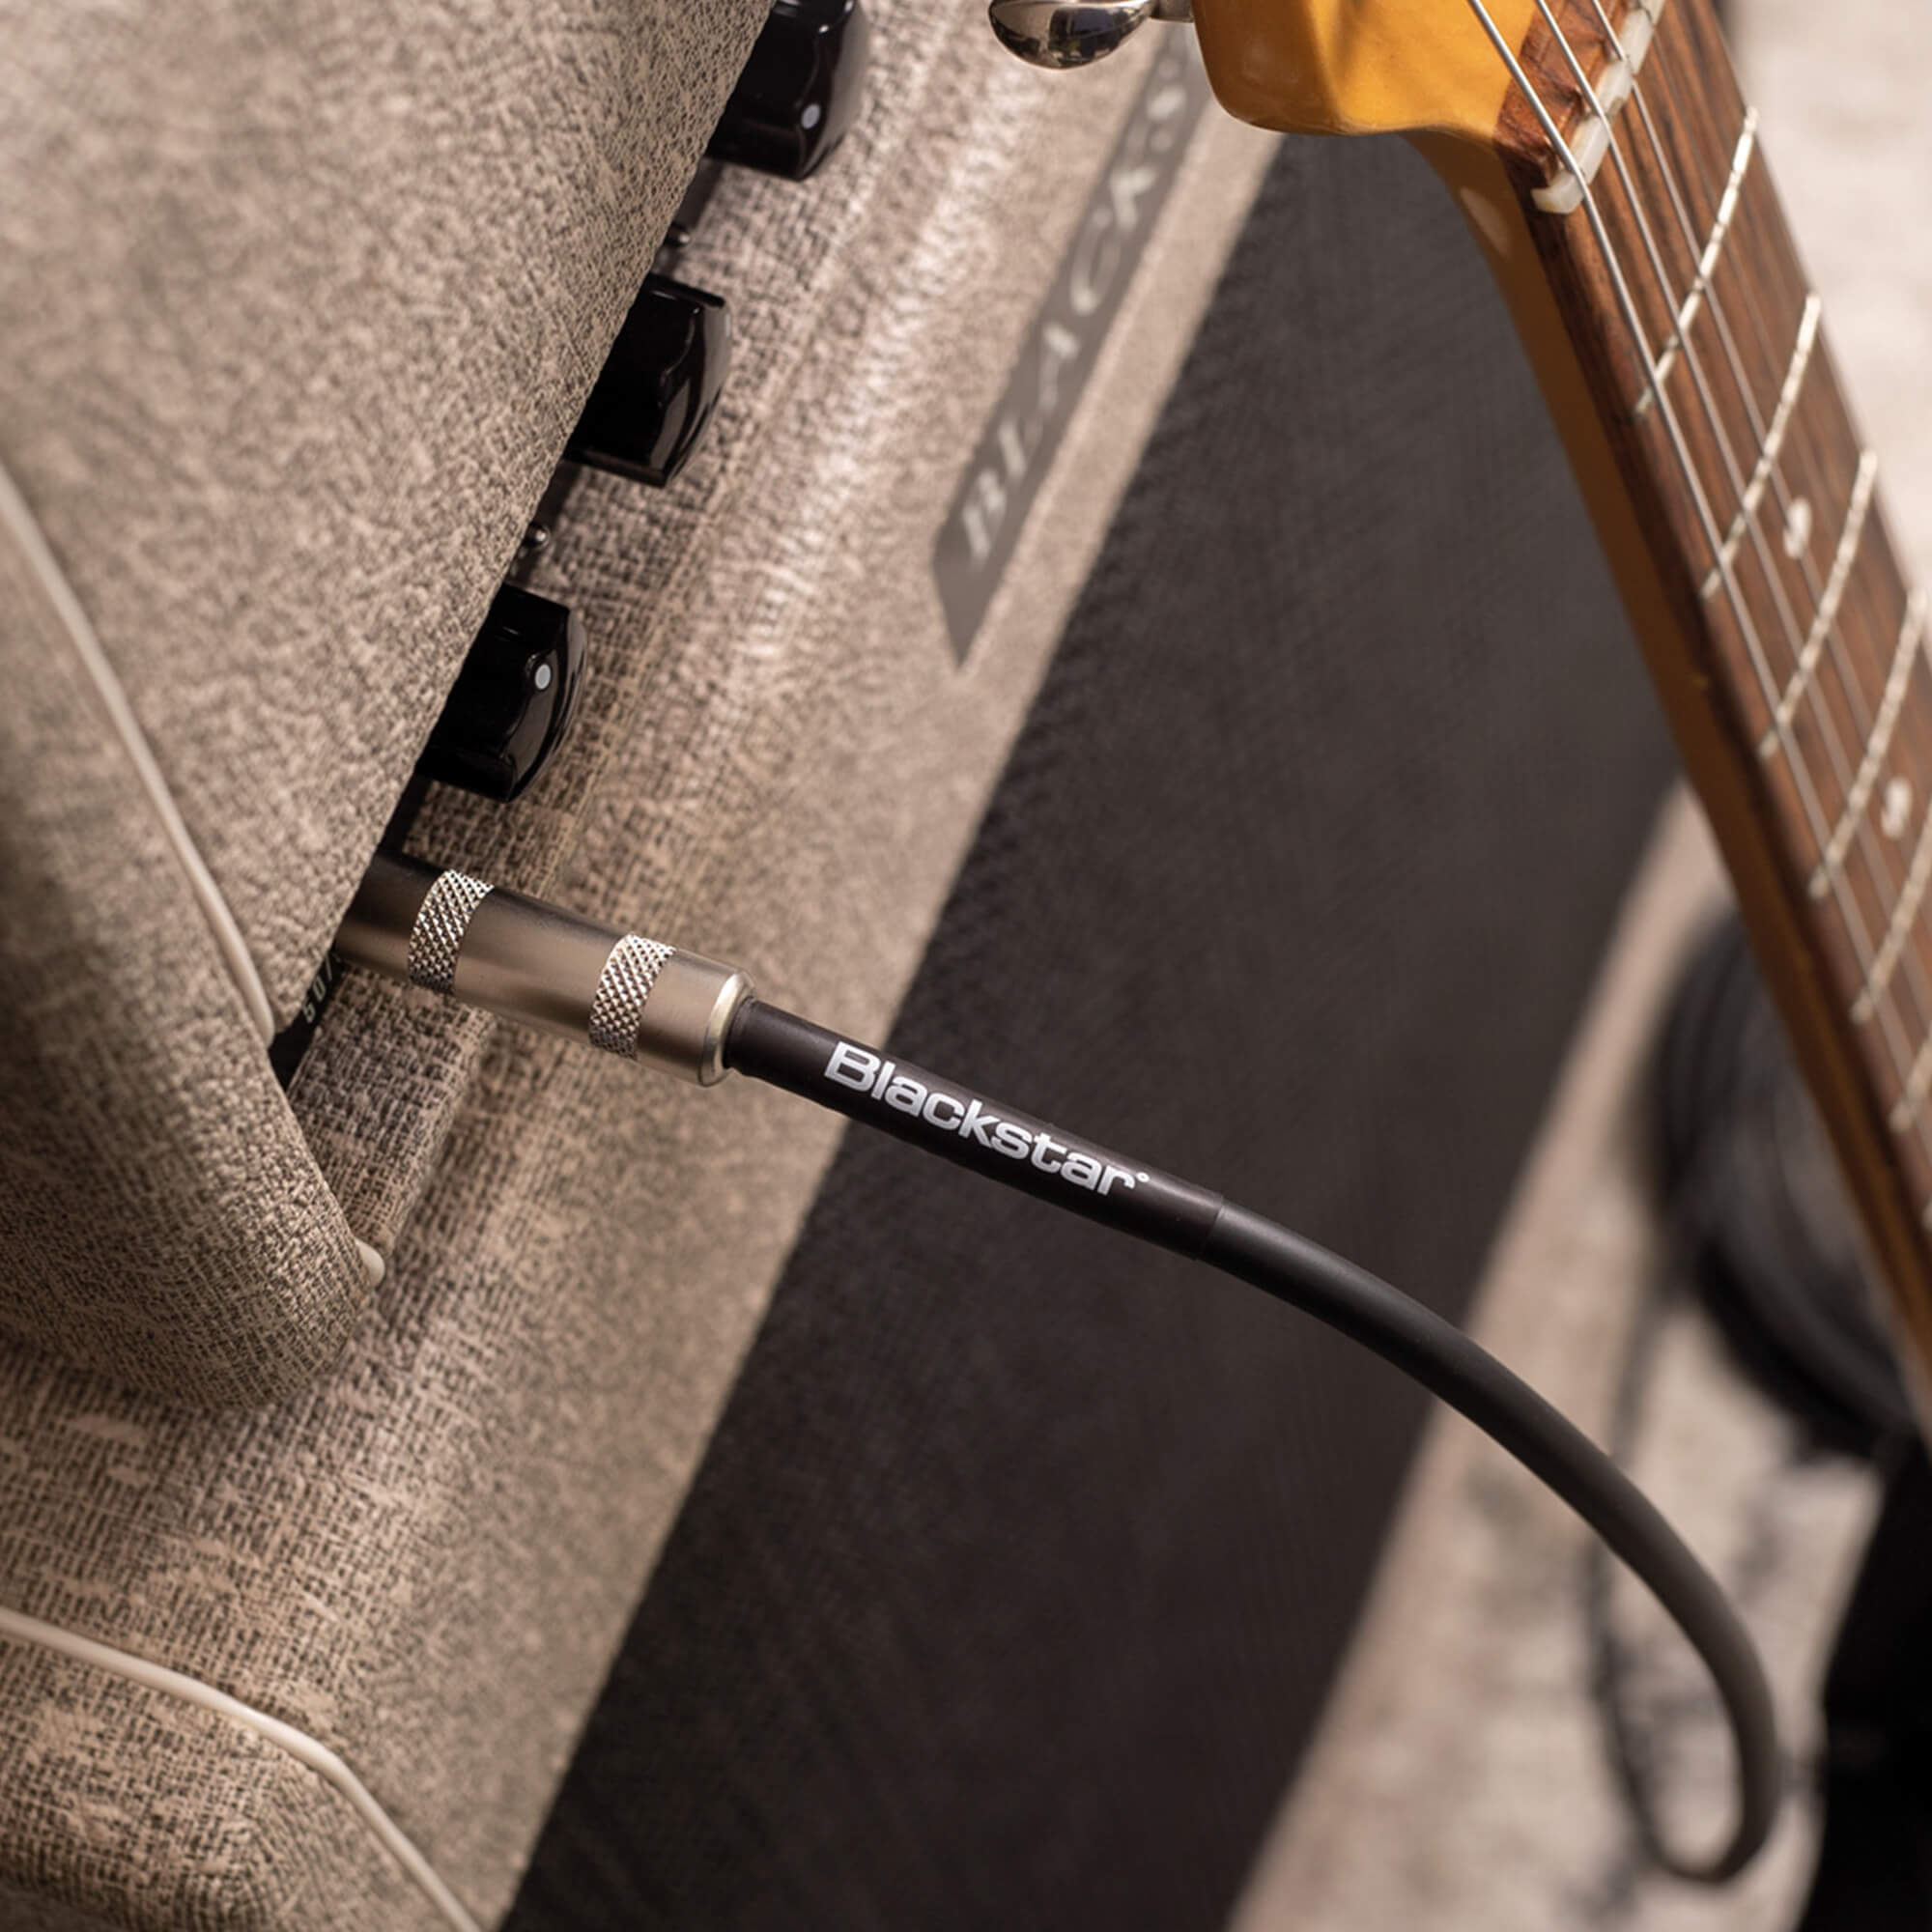 Blackstar instrument cable plugged into amplifier